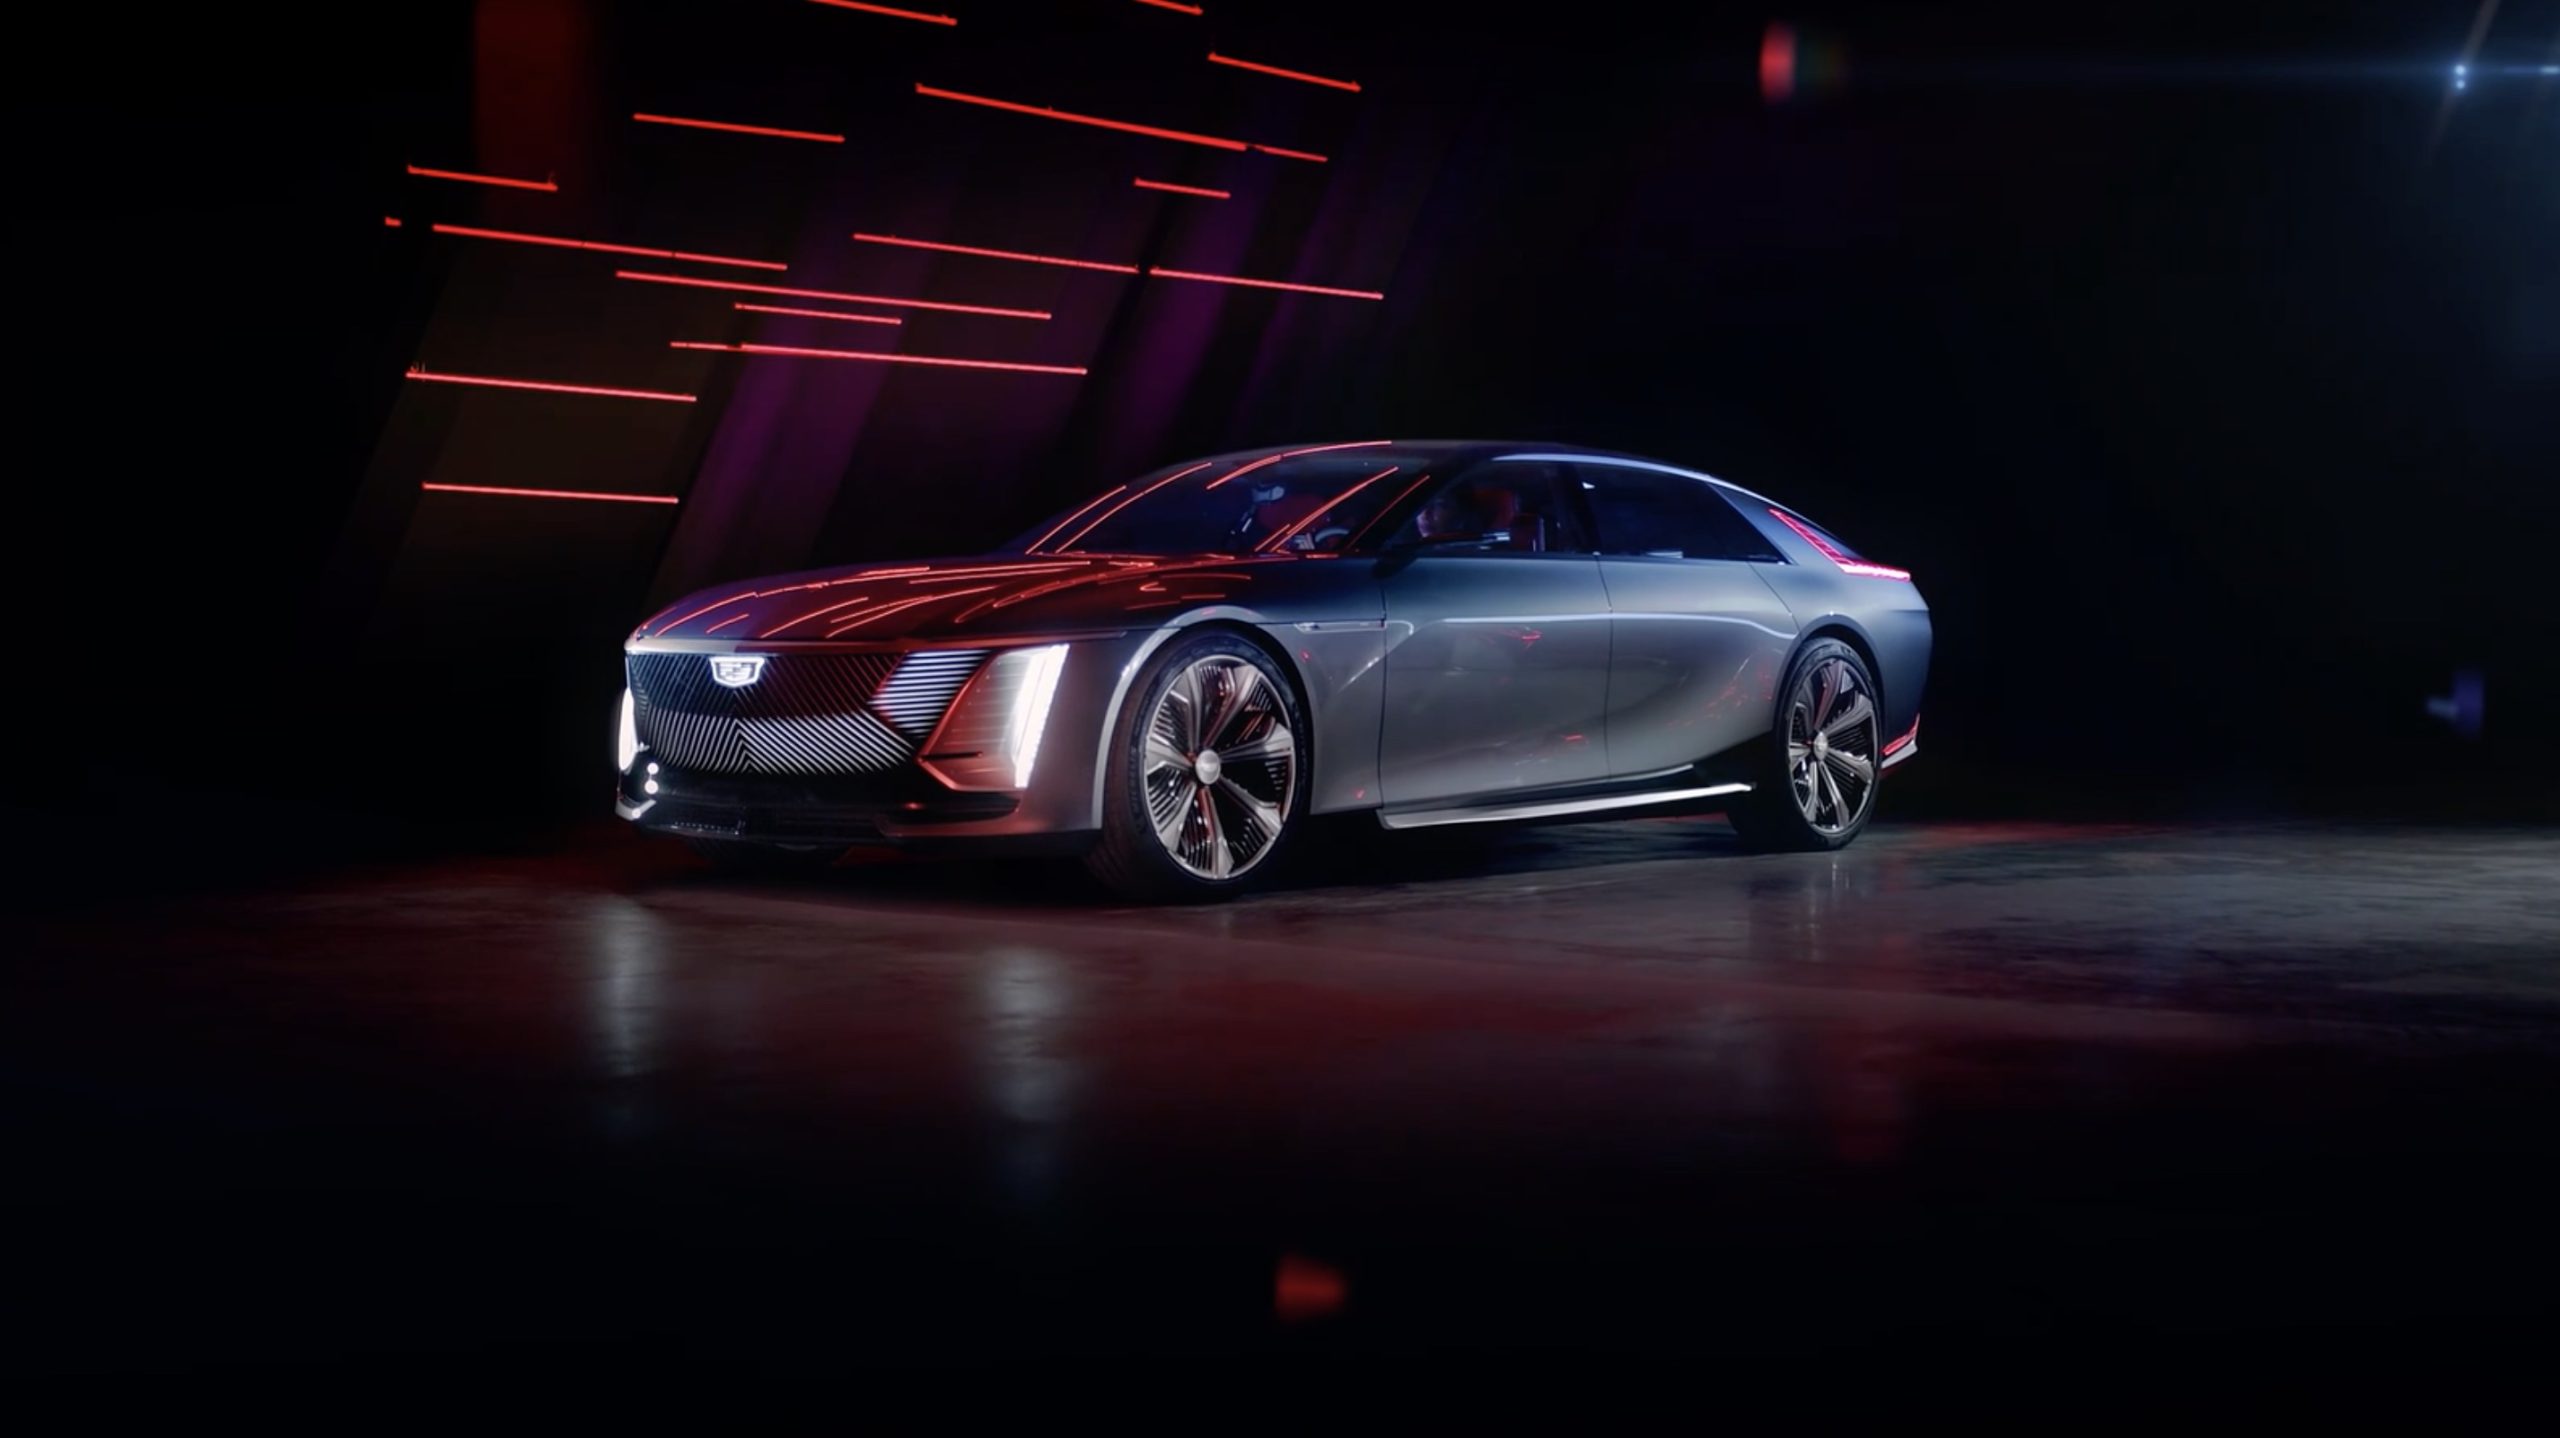 Cadillac Celestiq will begin with hefty price ticket of $340,000